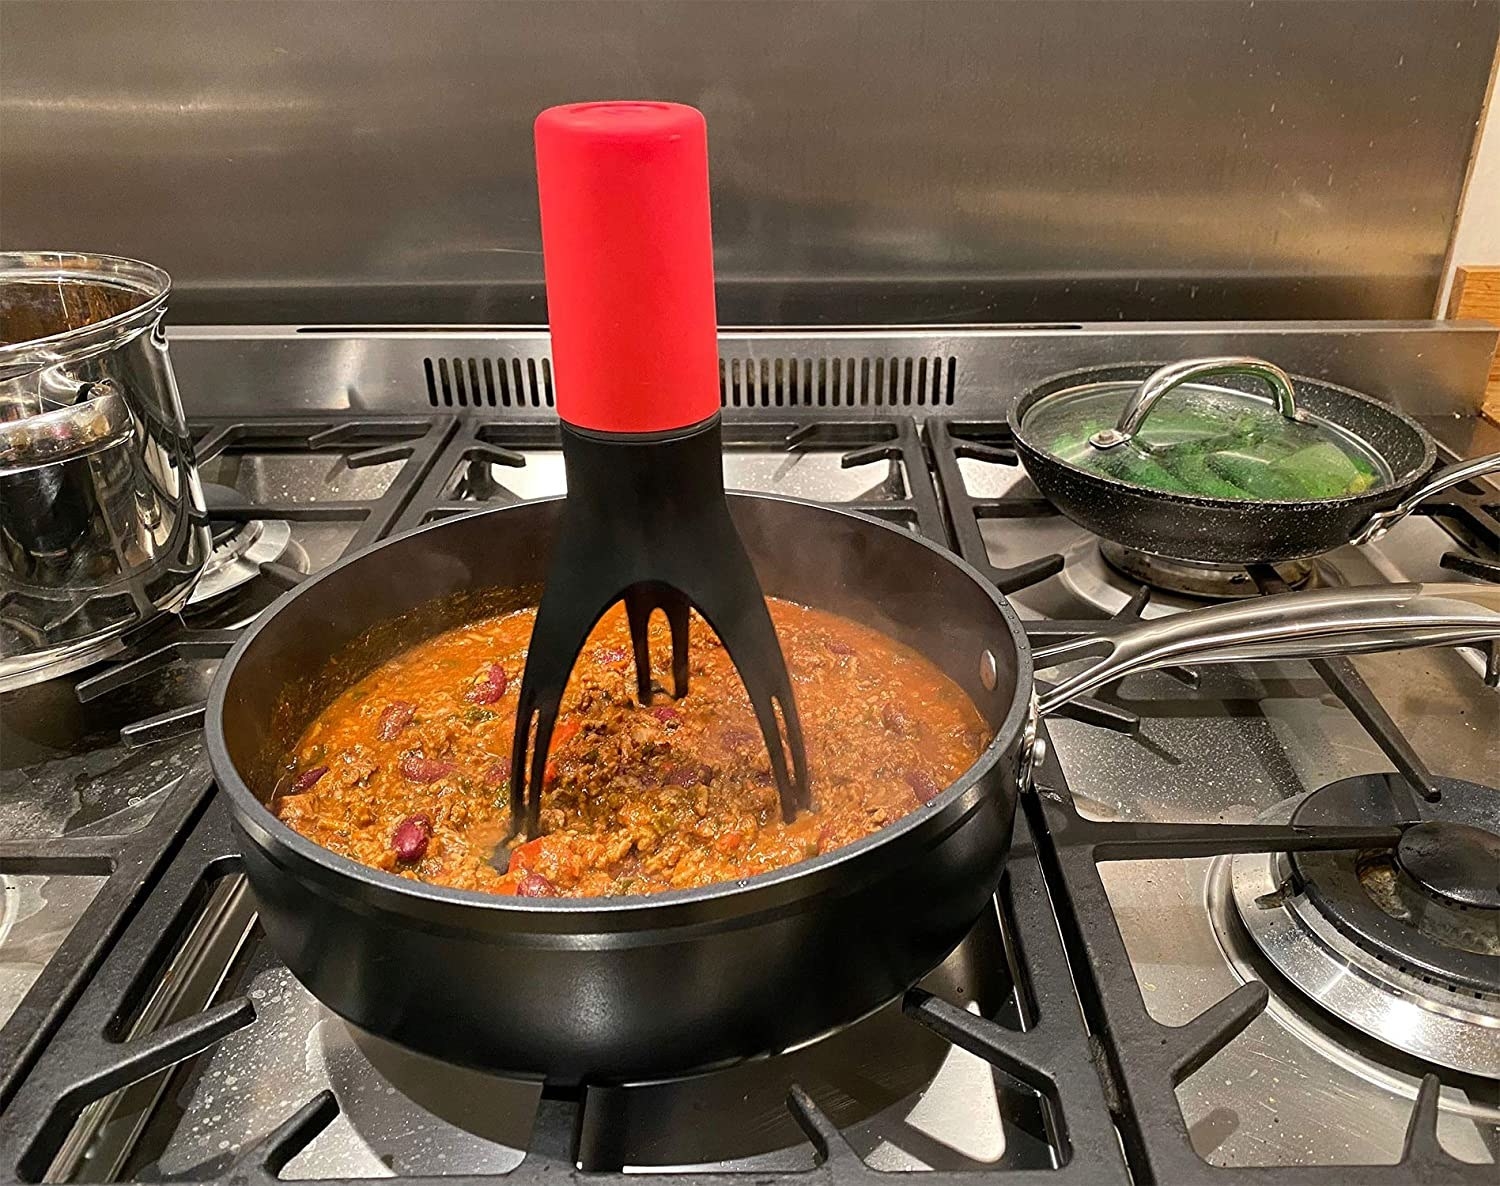 red automatic stirrer in a pot